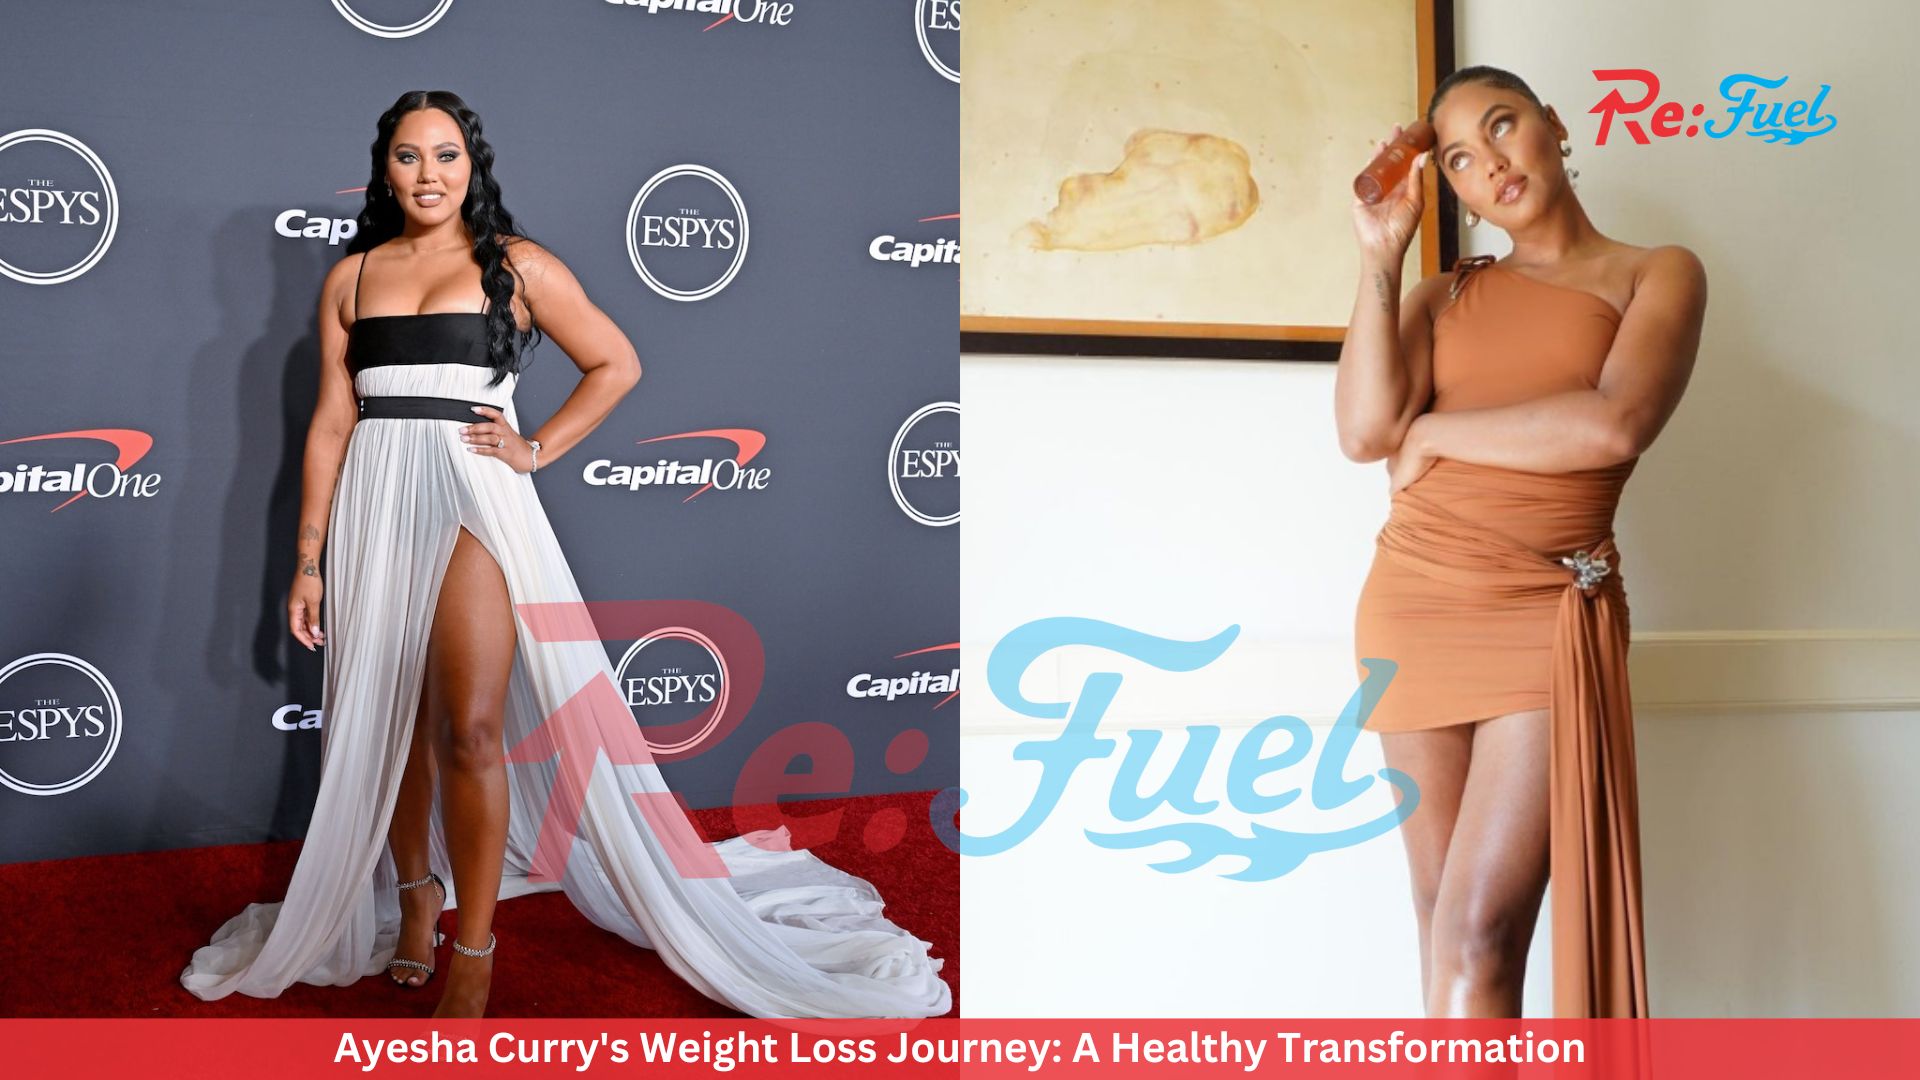 Ayesha Curry's Weight Loss Journey: A Healthy Transformation